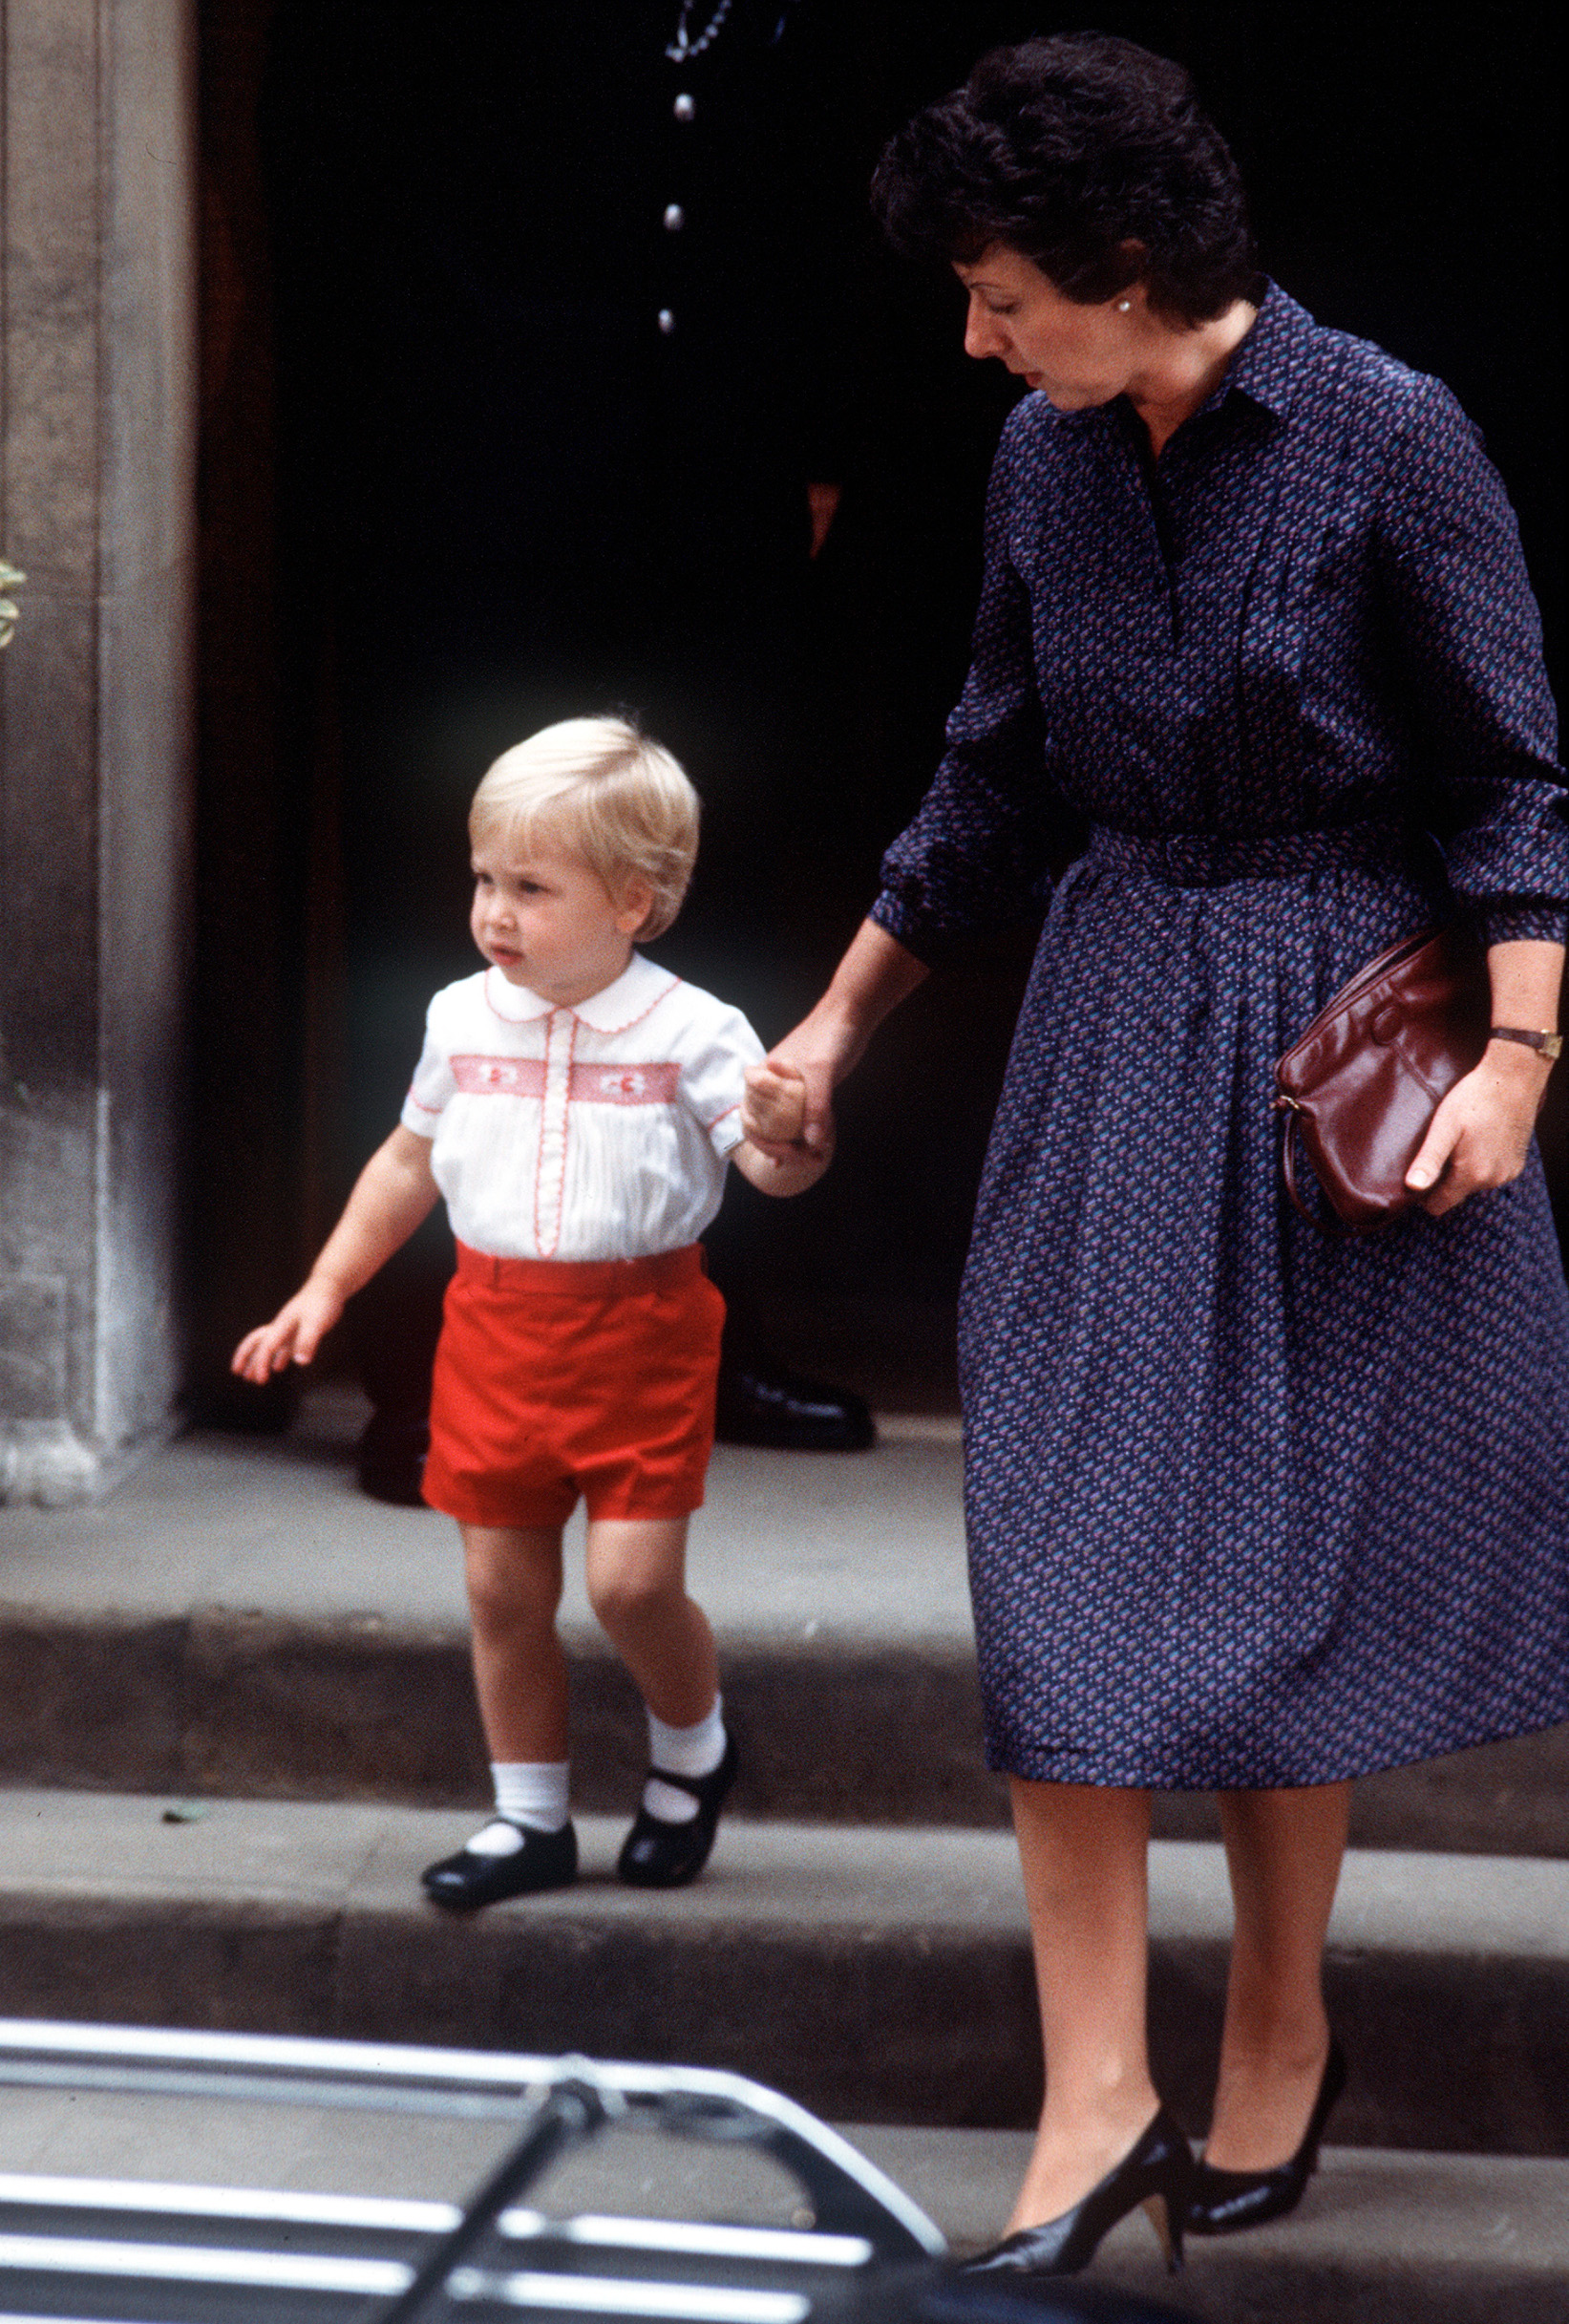 A young Prince William, accompanied by nanny Barbara Barnes, leaves St Mary's hospital, London on September 16, 1984 after seeing his newly born baby brother, Prince Harry. Prince George is seen wearing the same clothes as he attends the christening of his baby sister Princess Charlotte on July 5, 2015,Image: 251945155, License: Rights-managed, Restrictions: None, Model Release: no, Credit line: Anwar Hussein / PA Images / Profimedia